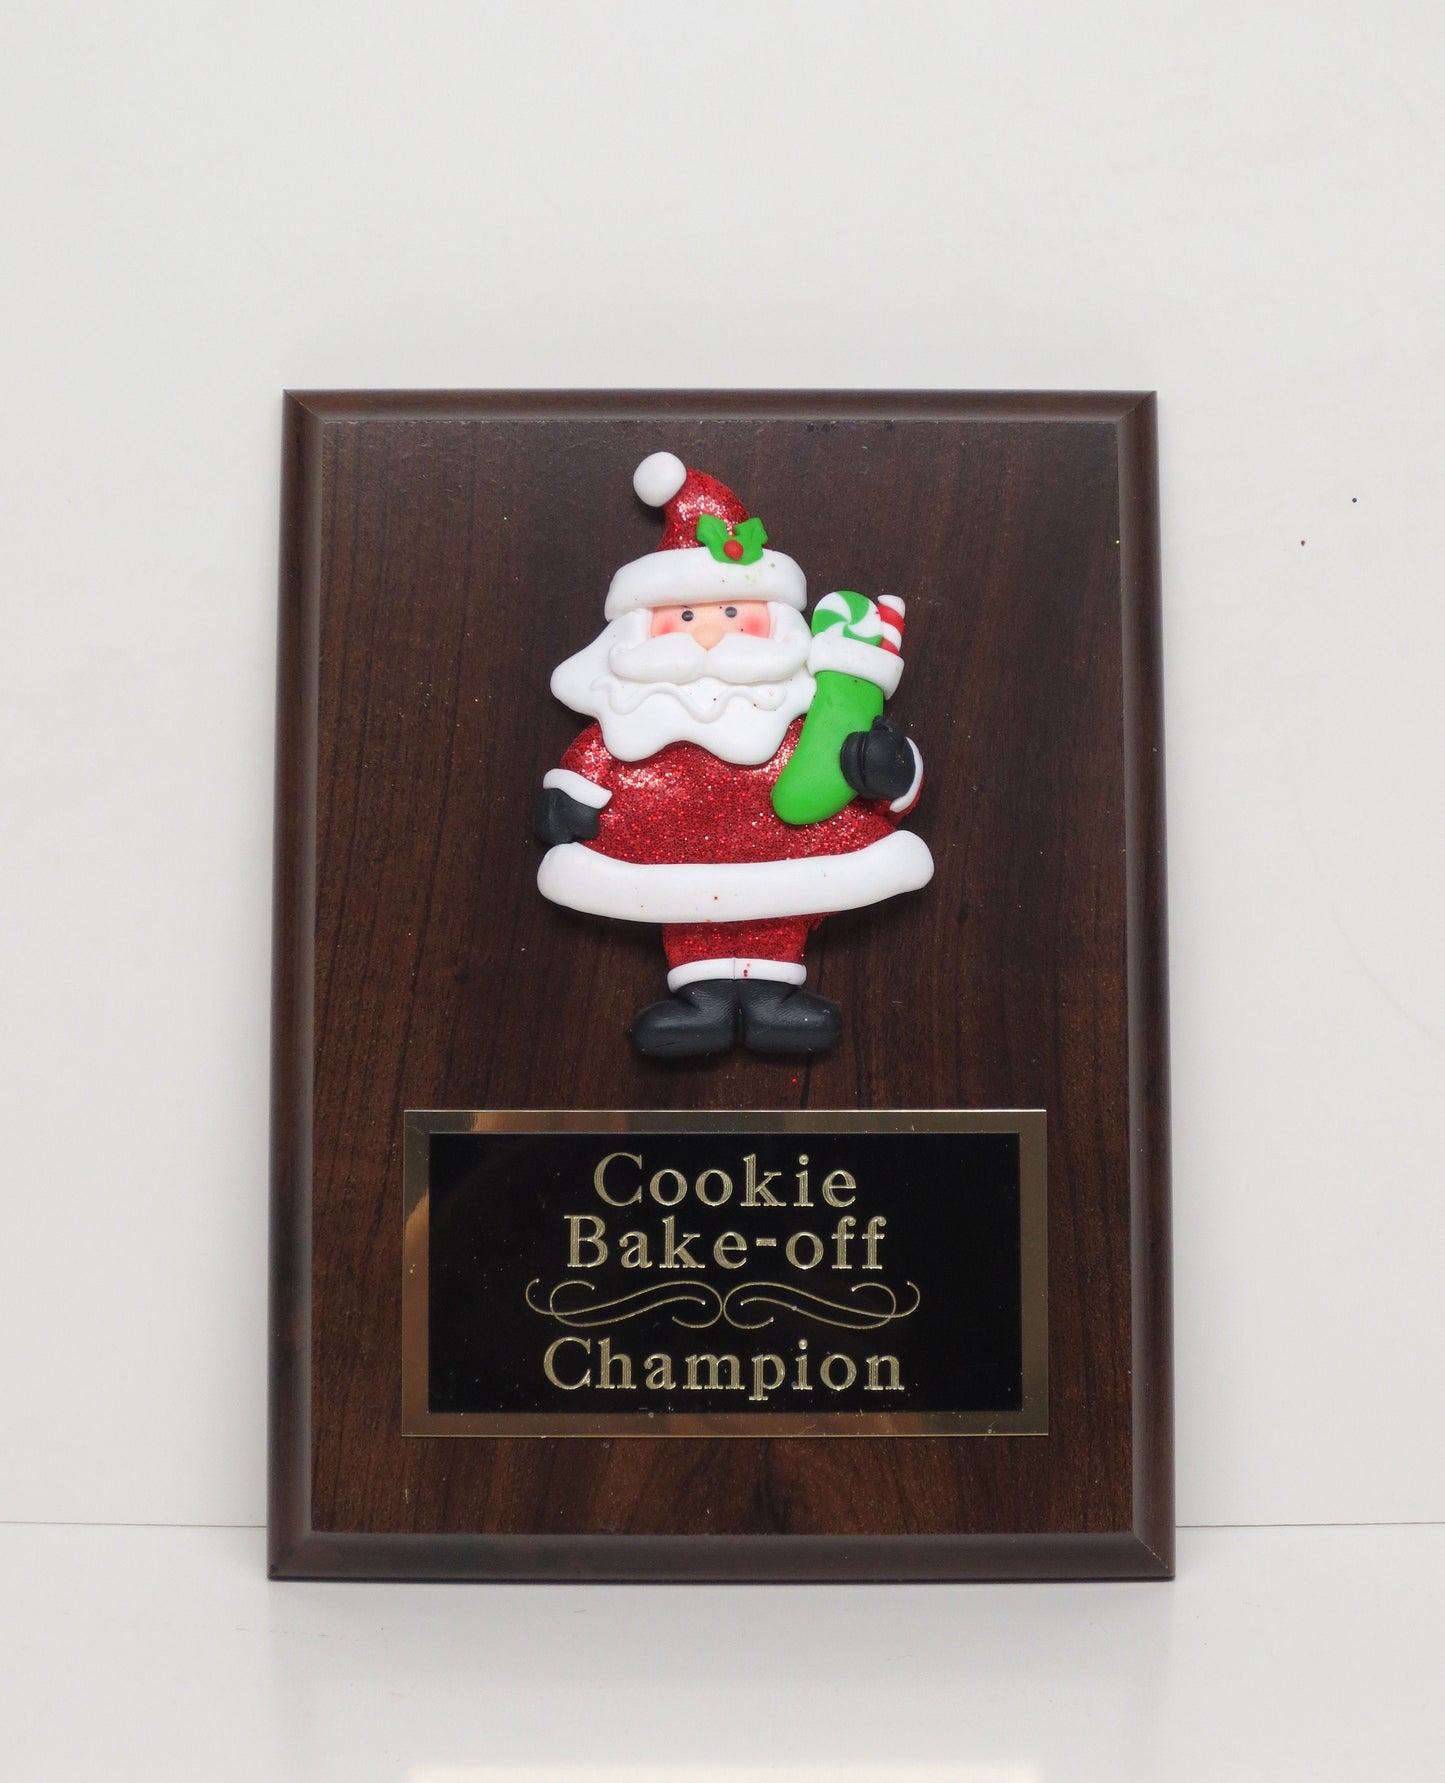 Ugly Sweater Trophy Plaque Stocking Santa Best Decorated Door Office House Gingerbread Cookie Bake Off Contest Holiday Christmas Decor